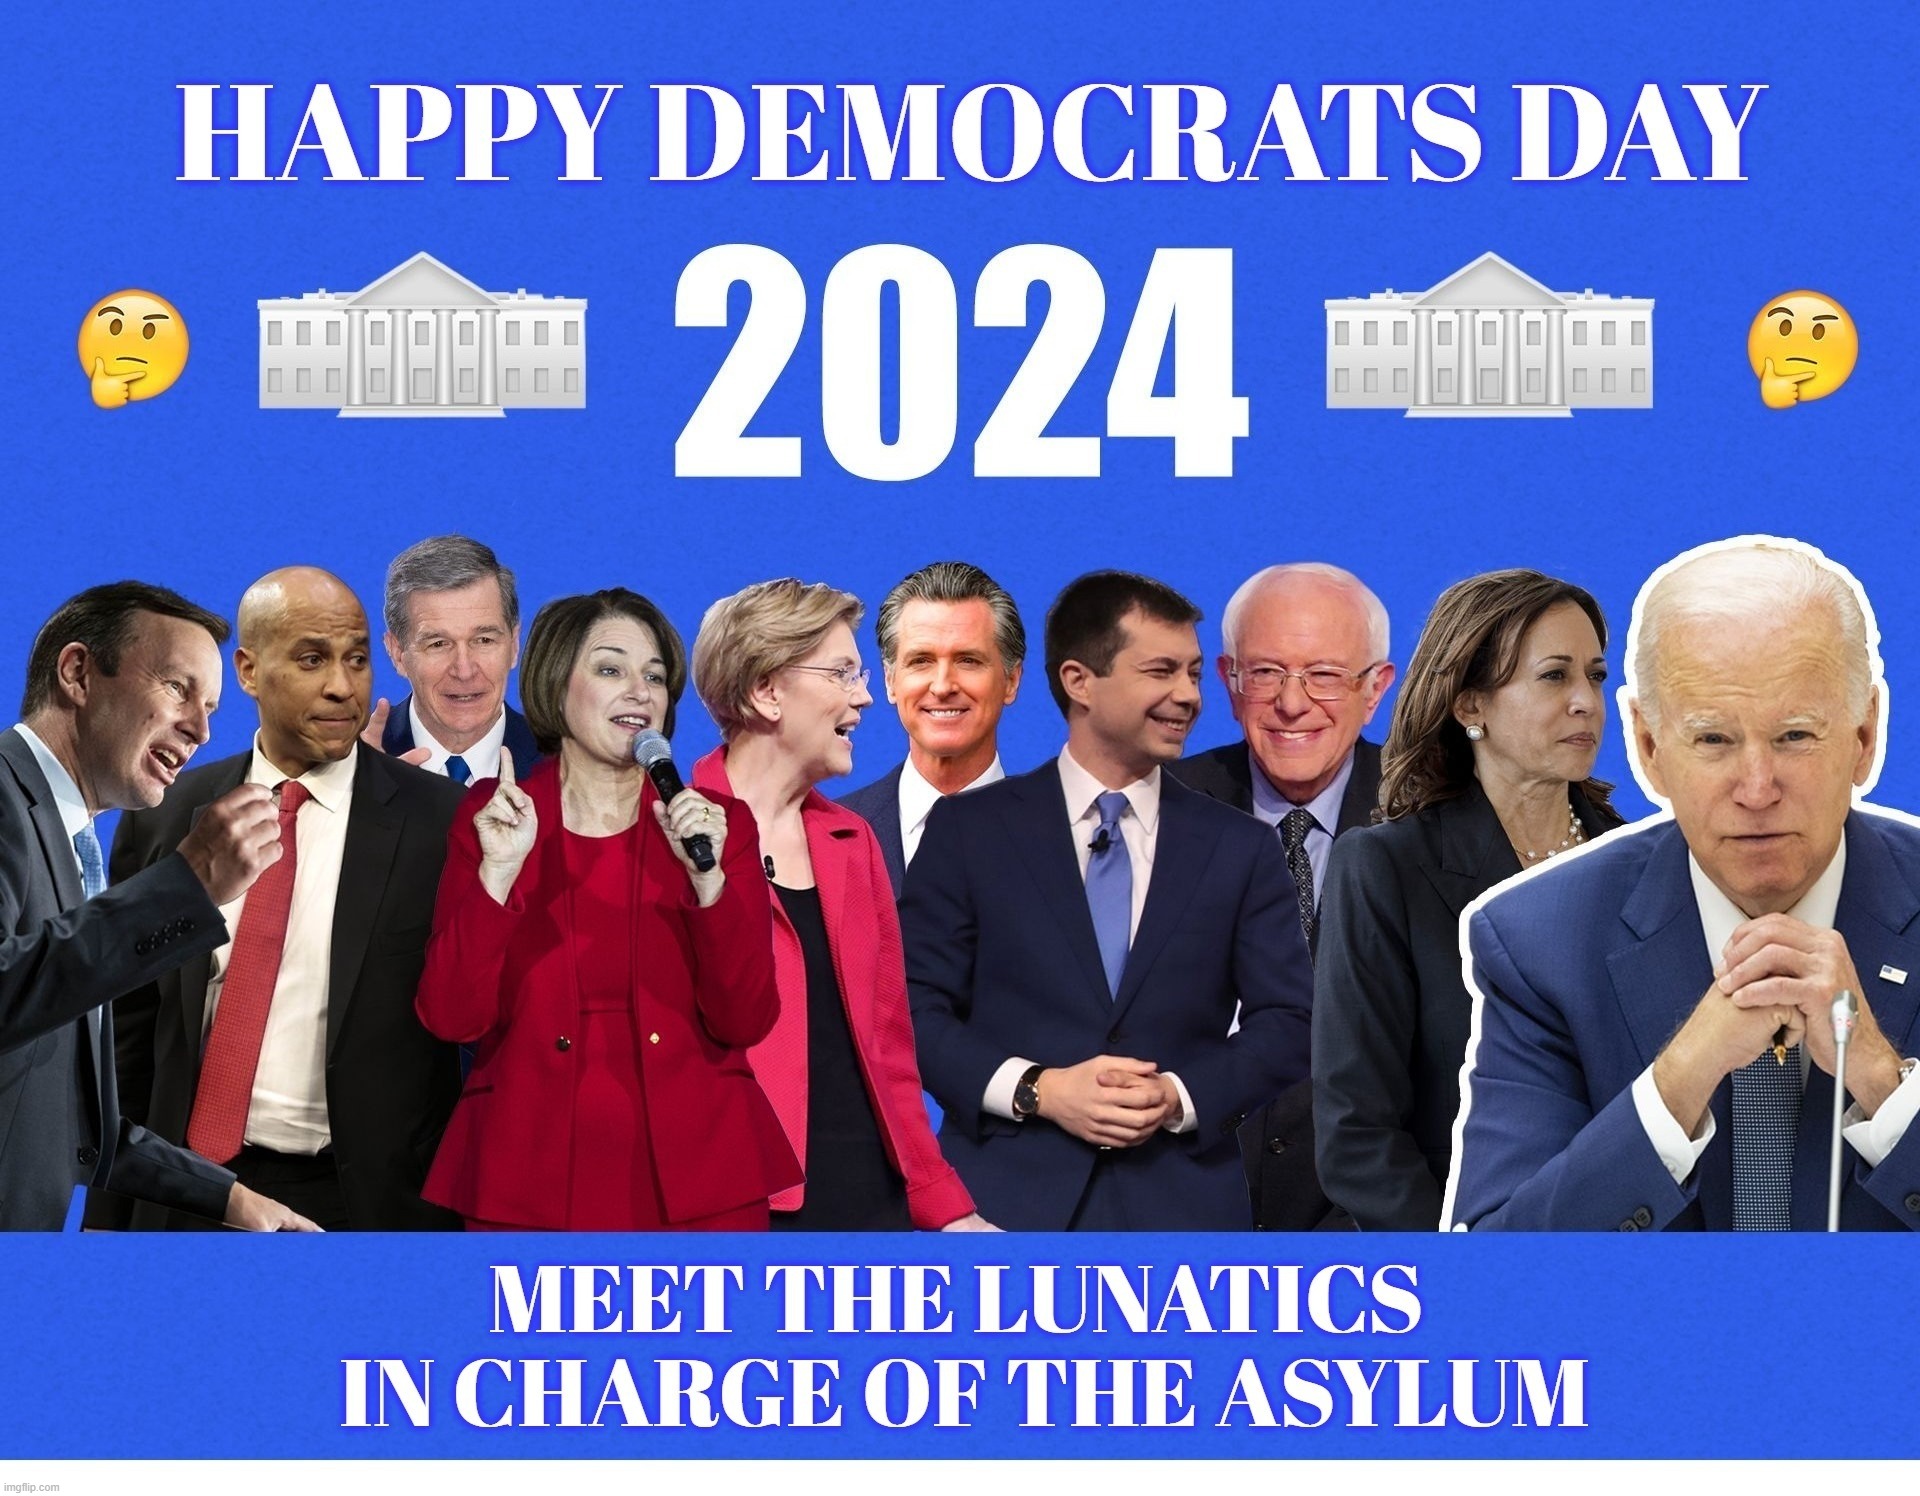 Happy Democrats Day 2024 | image tagged in april fools,democrats,democrat party,stupid people,special kind of stupid,lunatics | made w/ Imgflip meme maker